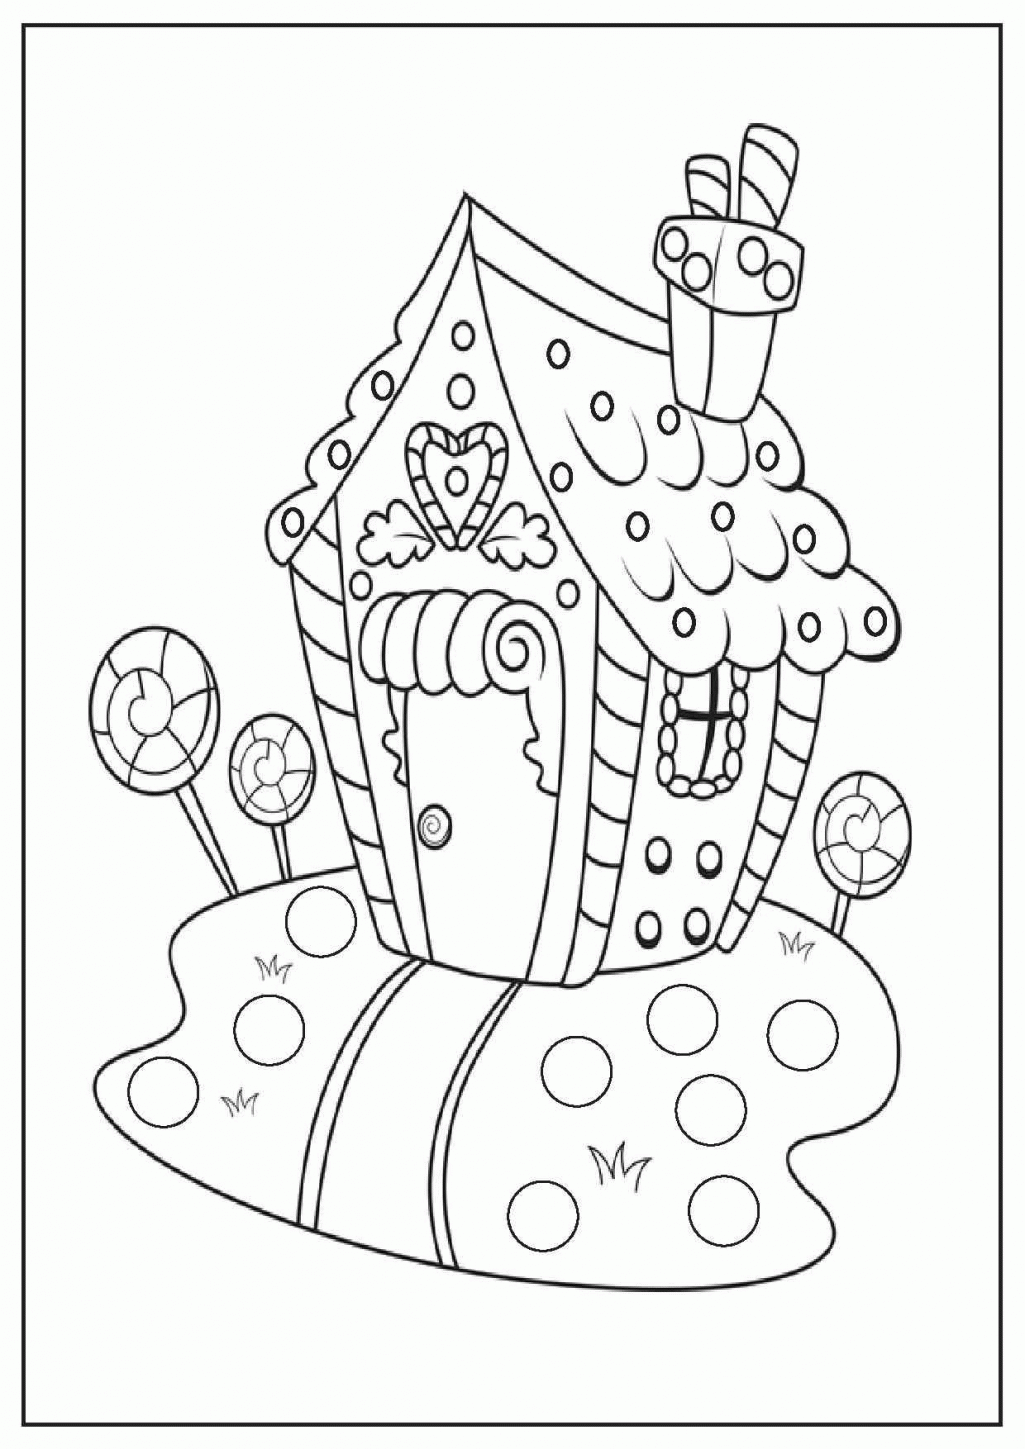 Printable Christmas Coloring Pages For 1st Graders ...